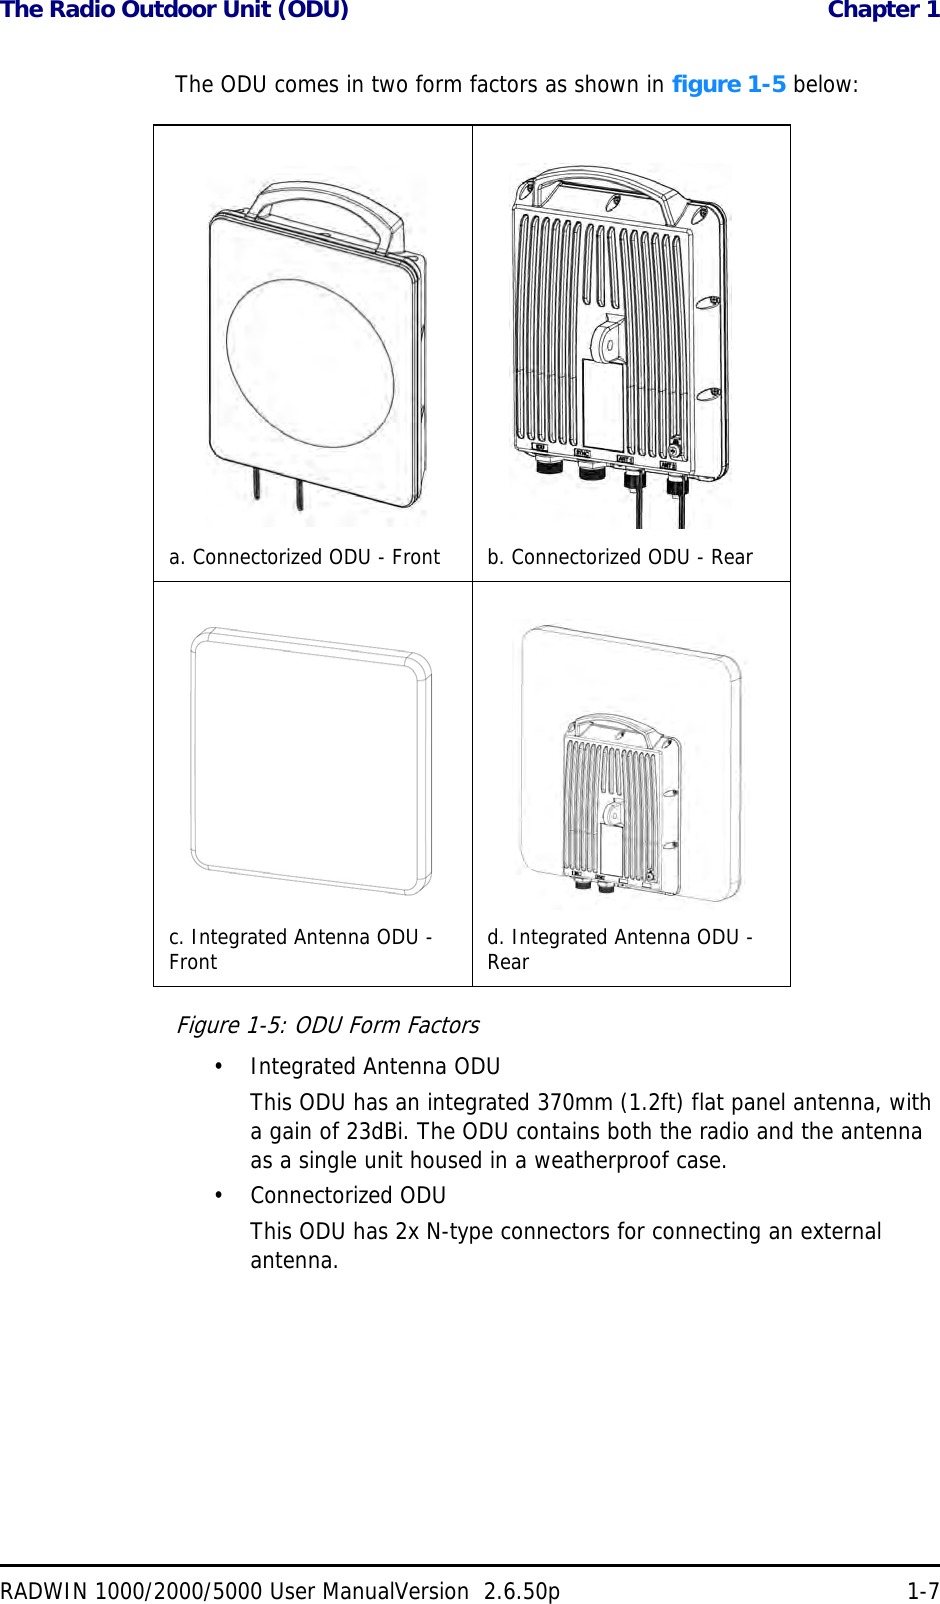 The Radio Outdoor Unit (ODU)  Chapter 1RADWIN 1000/2000/5000 User ManualVersion  2.6.50p 1-7The ODU comes in two form factors as shown in figure 1-5 below:Figure 1-5: ODU Form Factors• Integrated Antenna ODUThis ODU has an integrated 370mm (1.2ft) flat panel antenna, with a gain of 23dBi. The ODU contains both the radio and the antenna as a single unit housed in a weatherproof case.•Connectorized ODUThis ODU has 2x N-type connectors for connecting an external antenna.a. Connectorized ODU - Front b. Connectorized ODU - Rearc. Integrated Antenna ODU - Front d. Integrated Antenna ODU - Rear